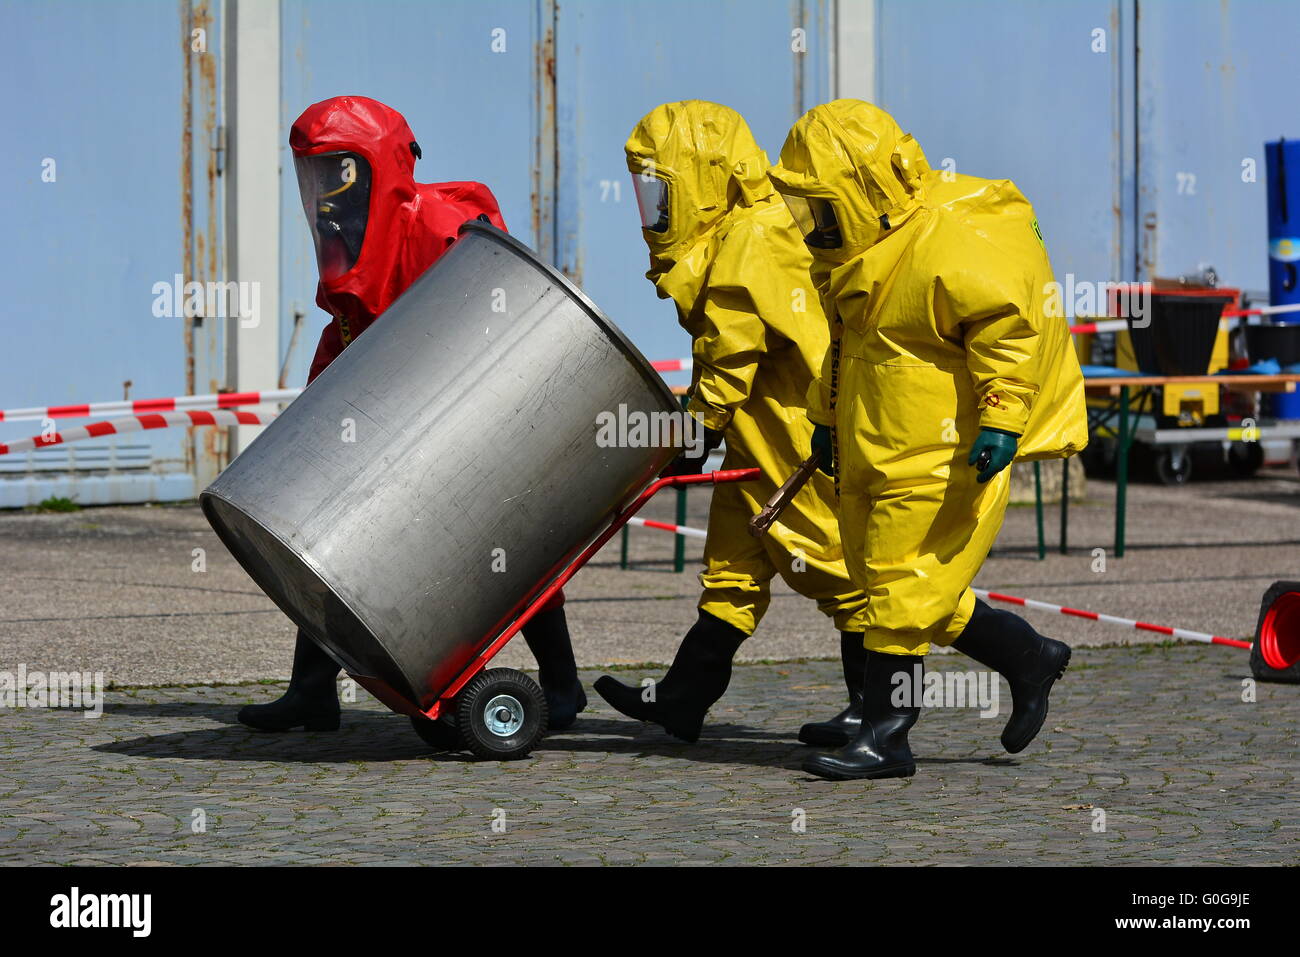 Worker in protective uniform,mask,gloves and boots  transport barrels of chemicals Stock Photo